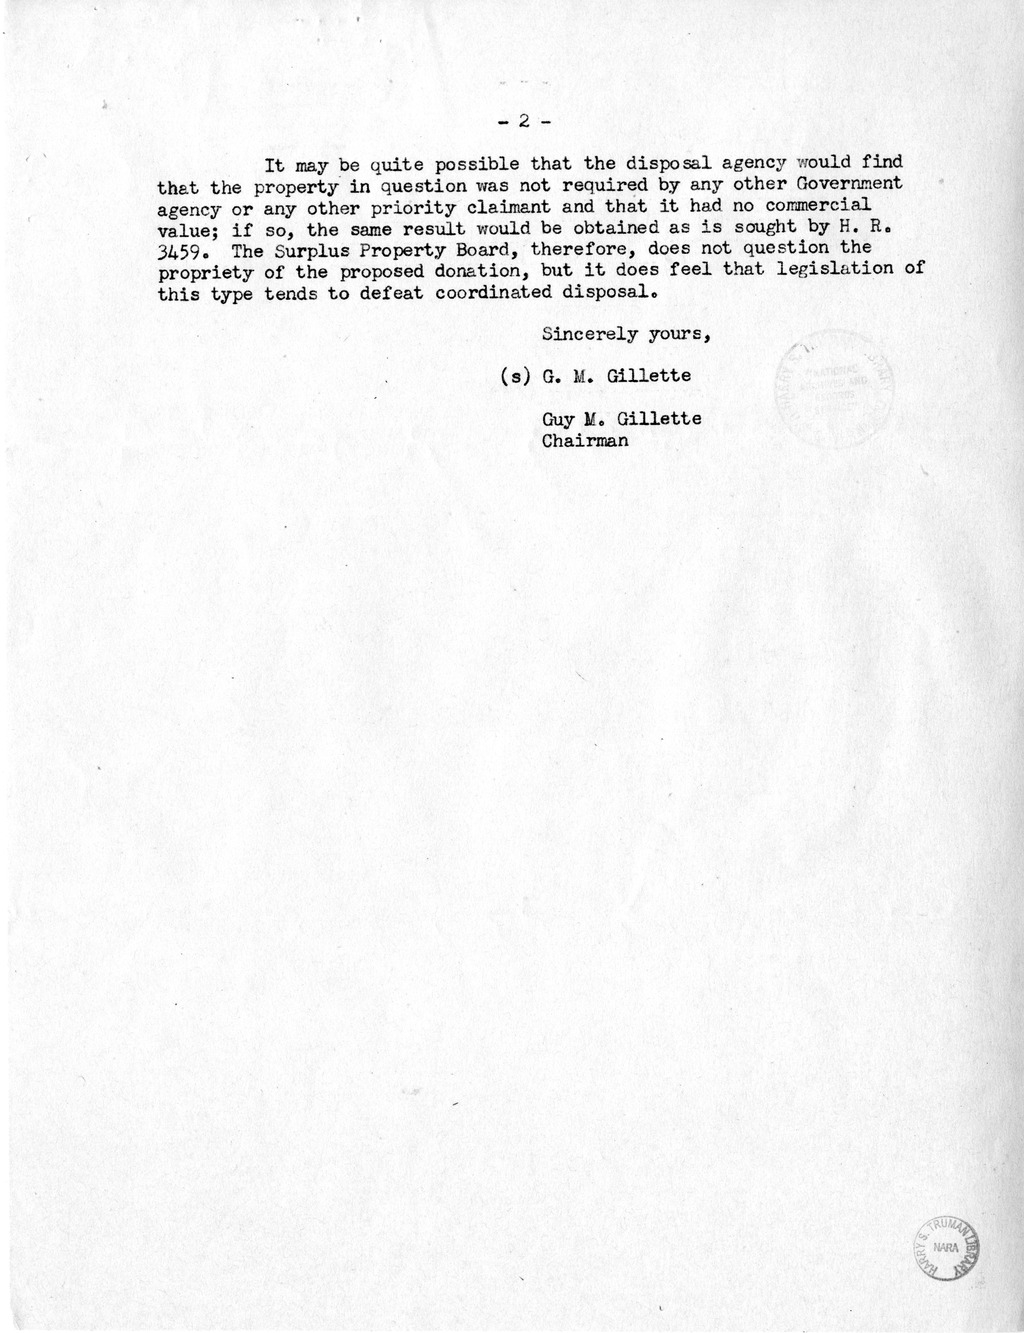 Memorandum from Harold D. Smith to M. C. Latta, H.R. 3549, To Provide for the Conveyance of Certain Weather Bureau Property to Norwich University, Northfield, Vermont, with Attachments